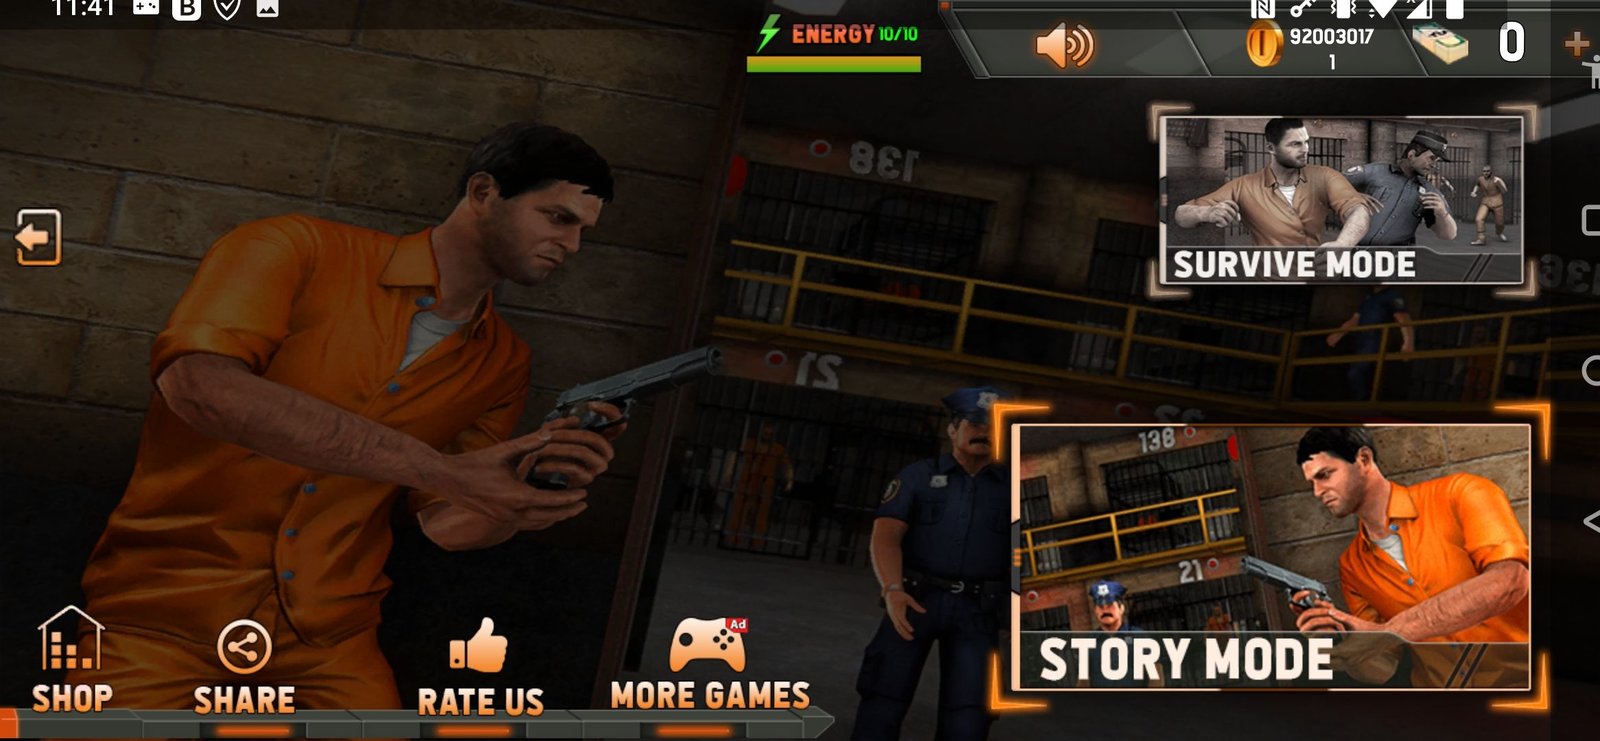 100 DOORS : HELL PRISON ESCAPE APK para Android - Download